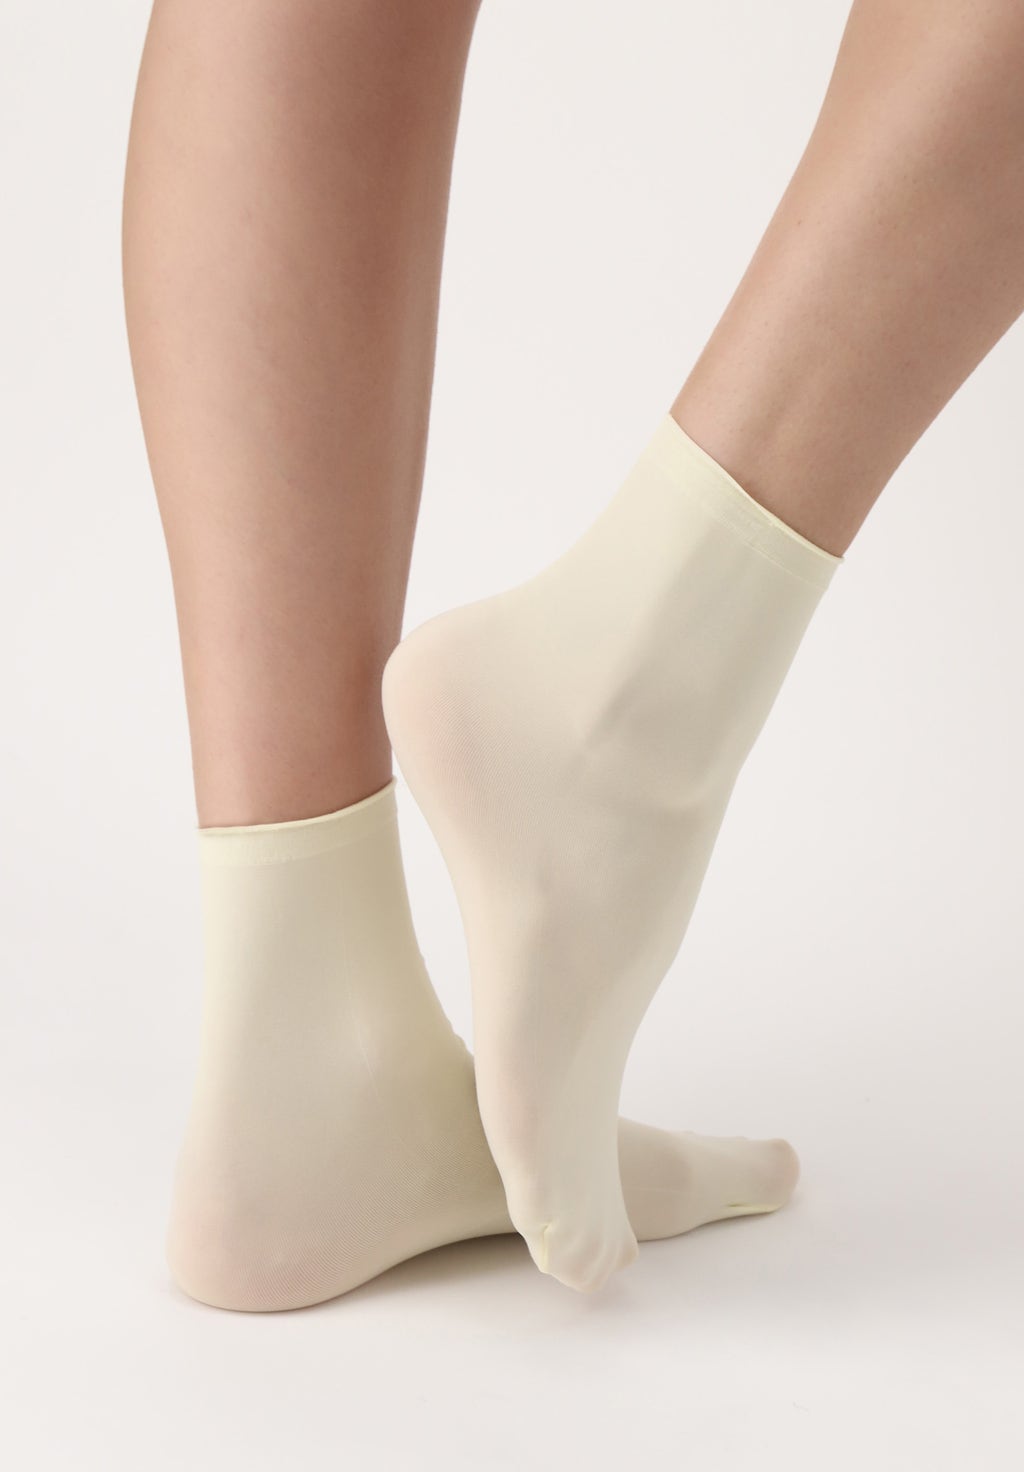 OroblÌ_ All Colors Sock - Soft plain pale pastel yellow (vanilla) opaque ankle tube socks with plain cuff.